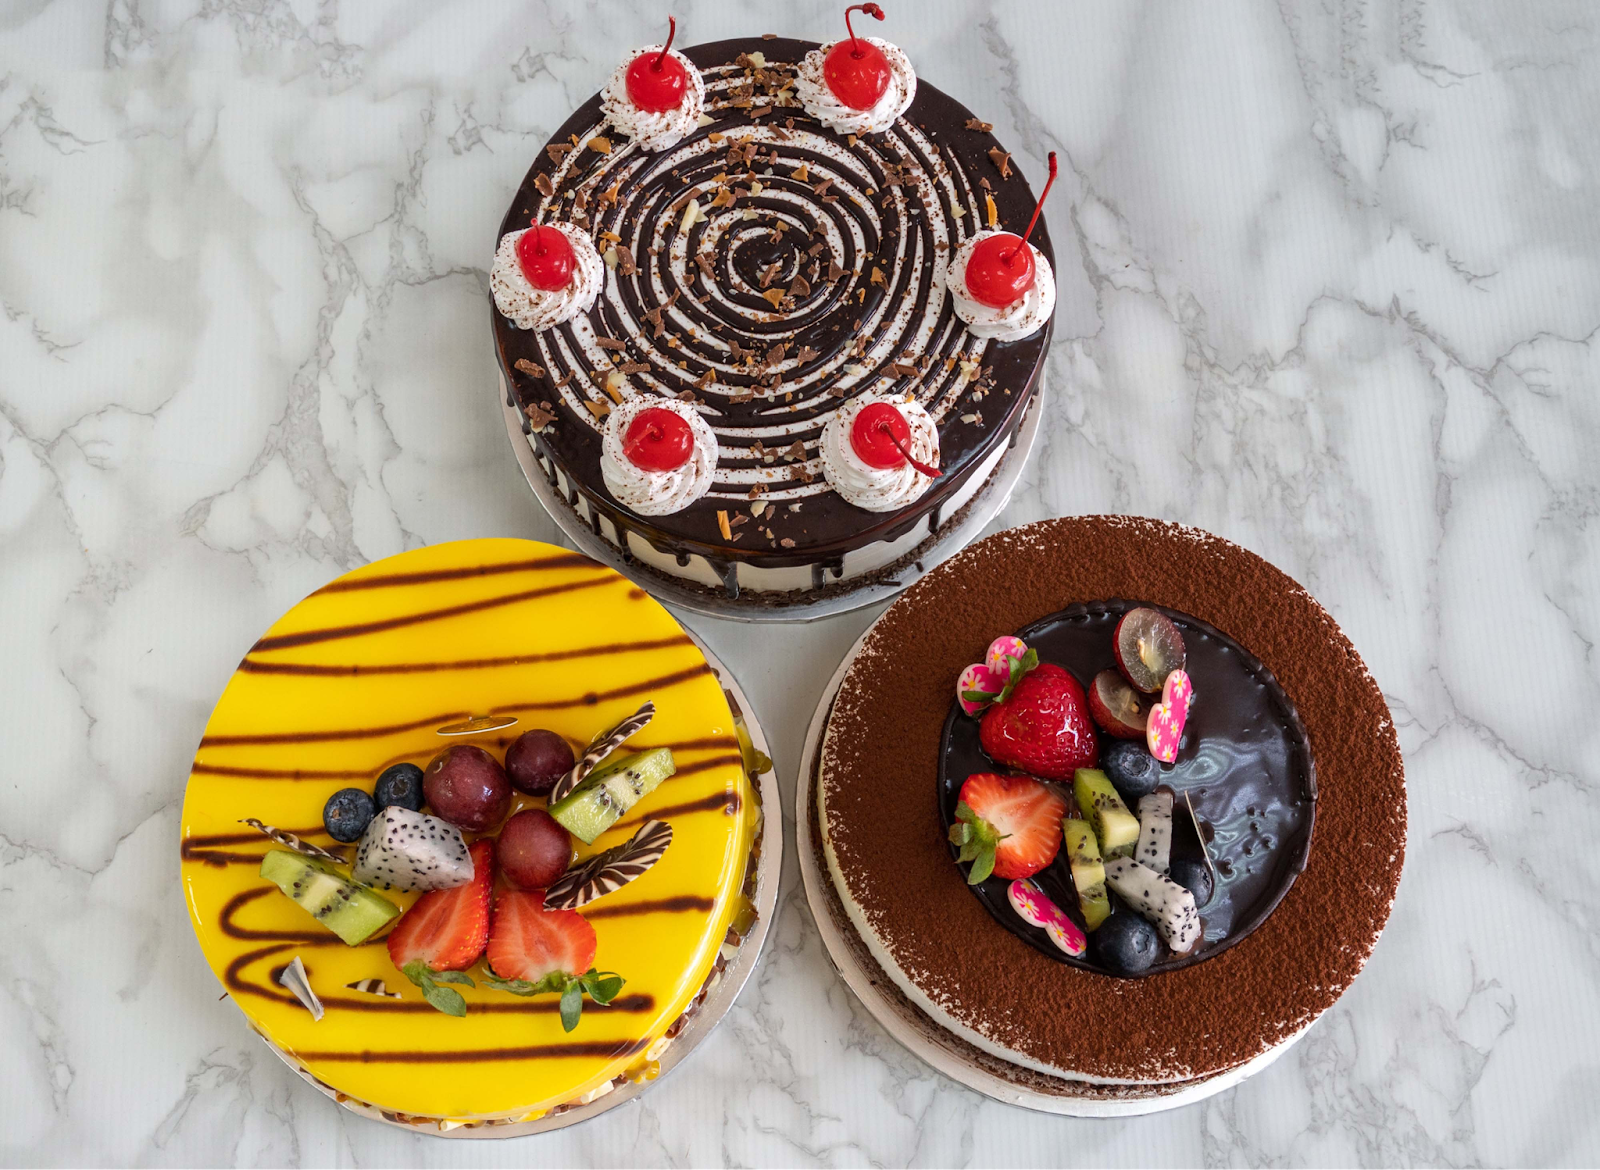 Cake Shops in Ipoh